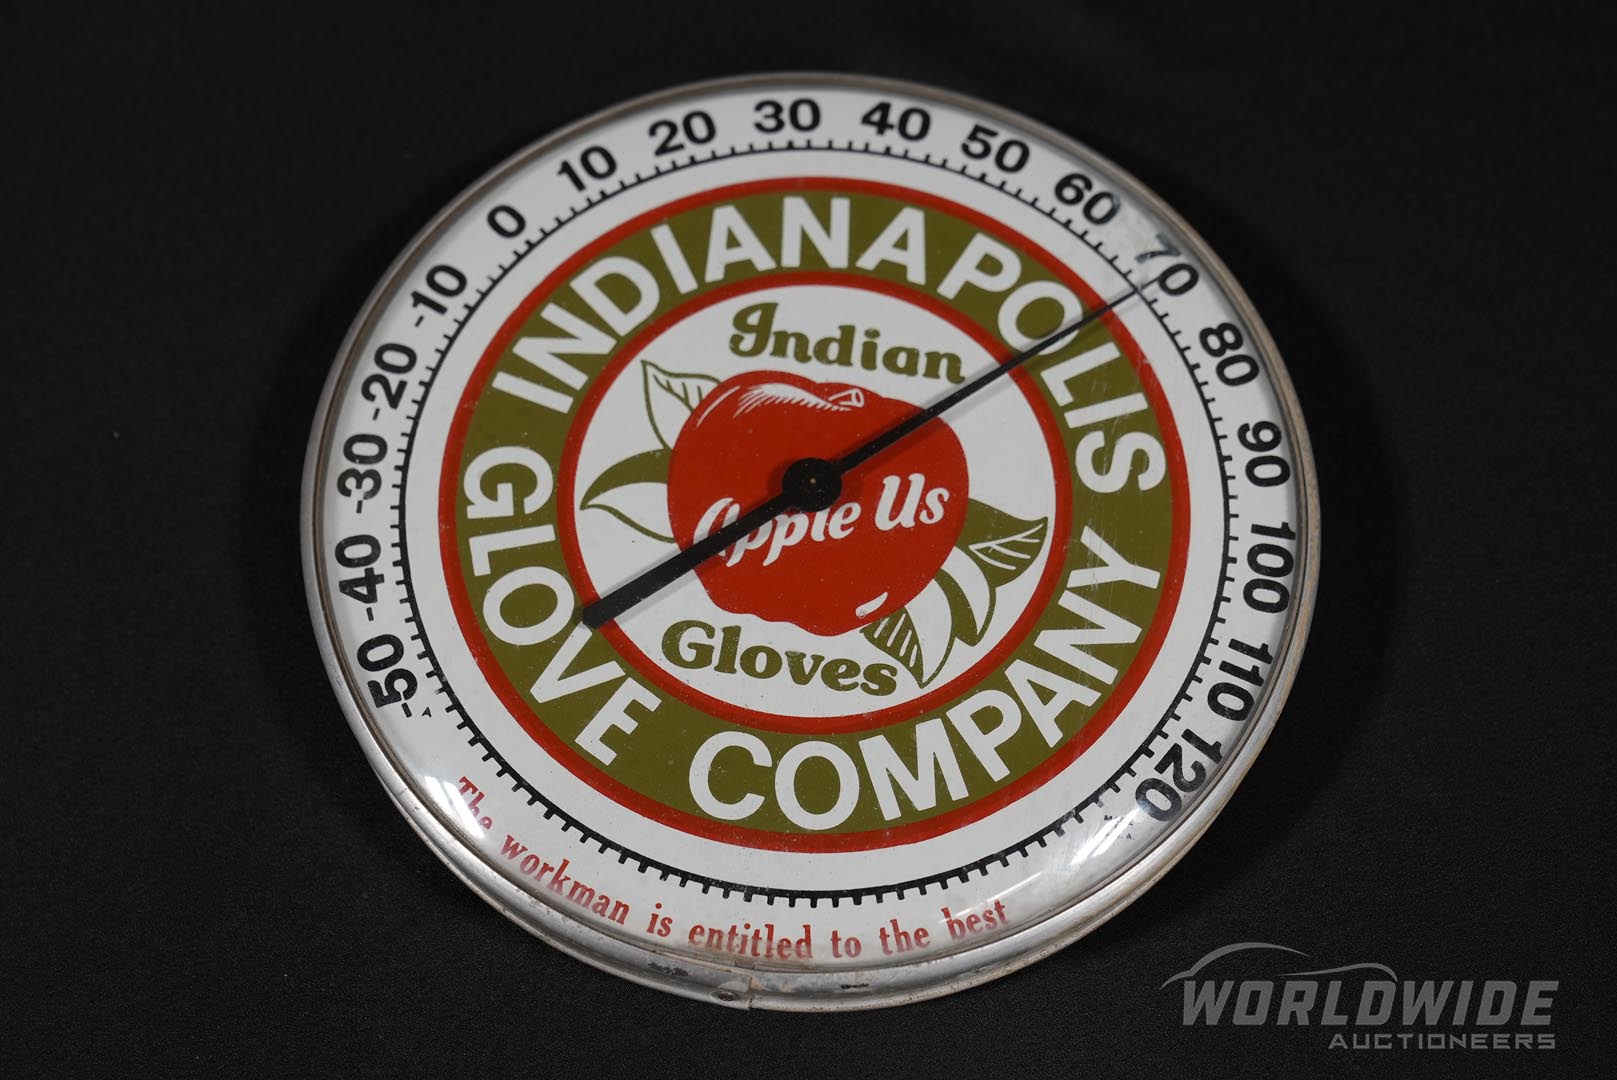 Indianapolis Glove Company Thermometer